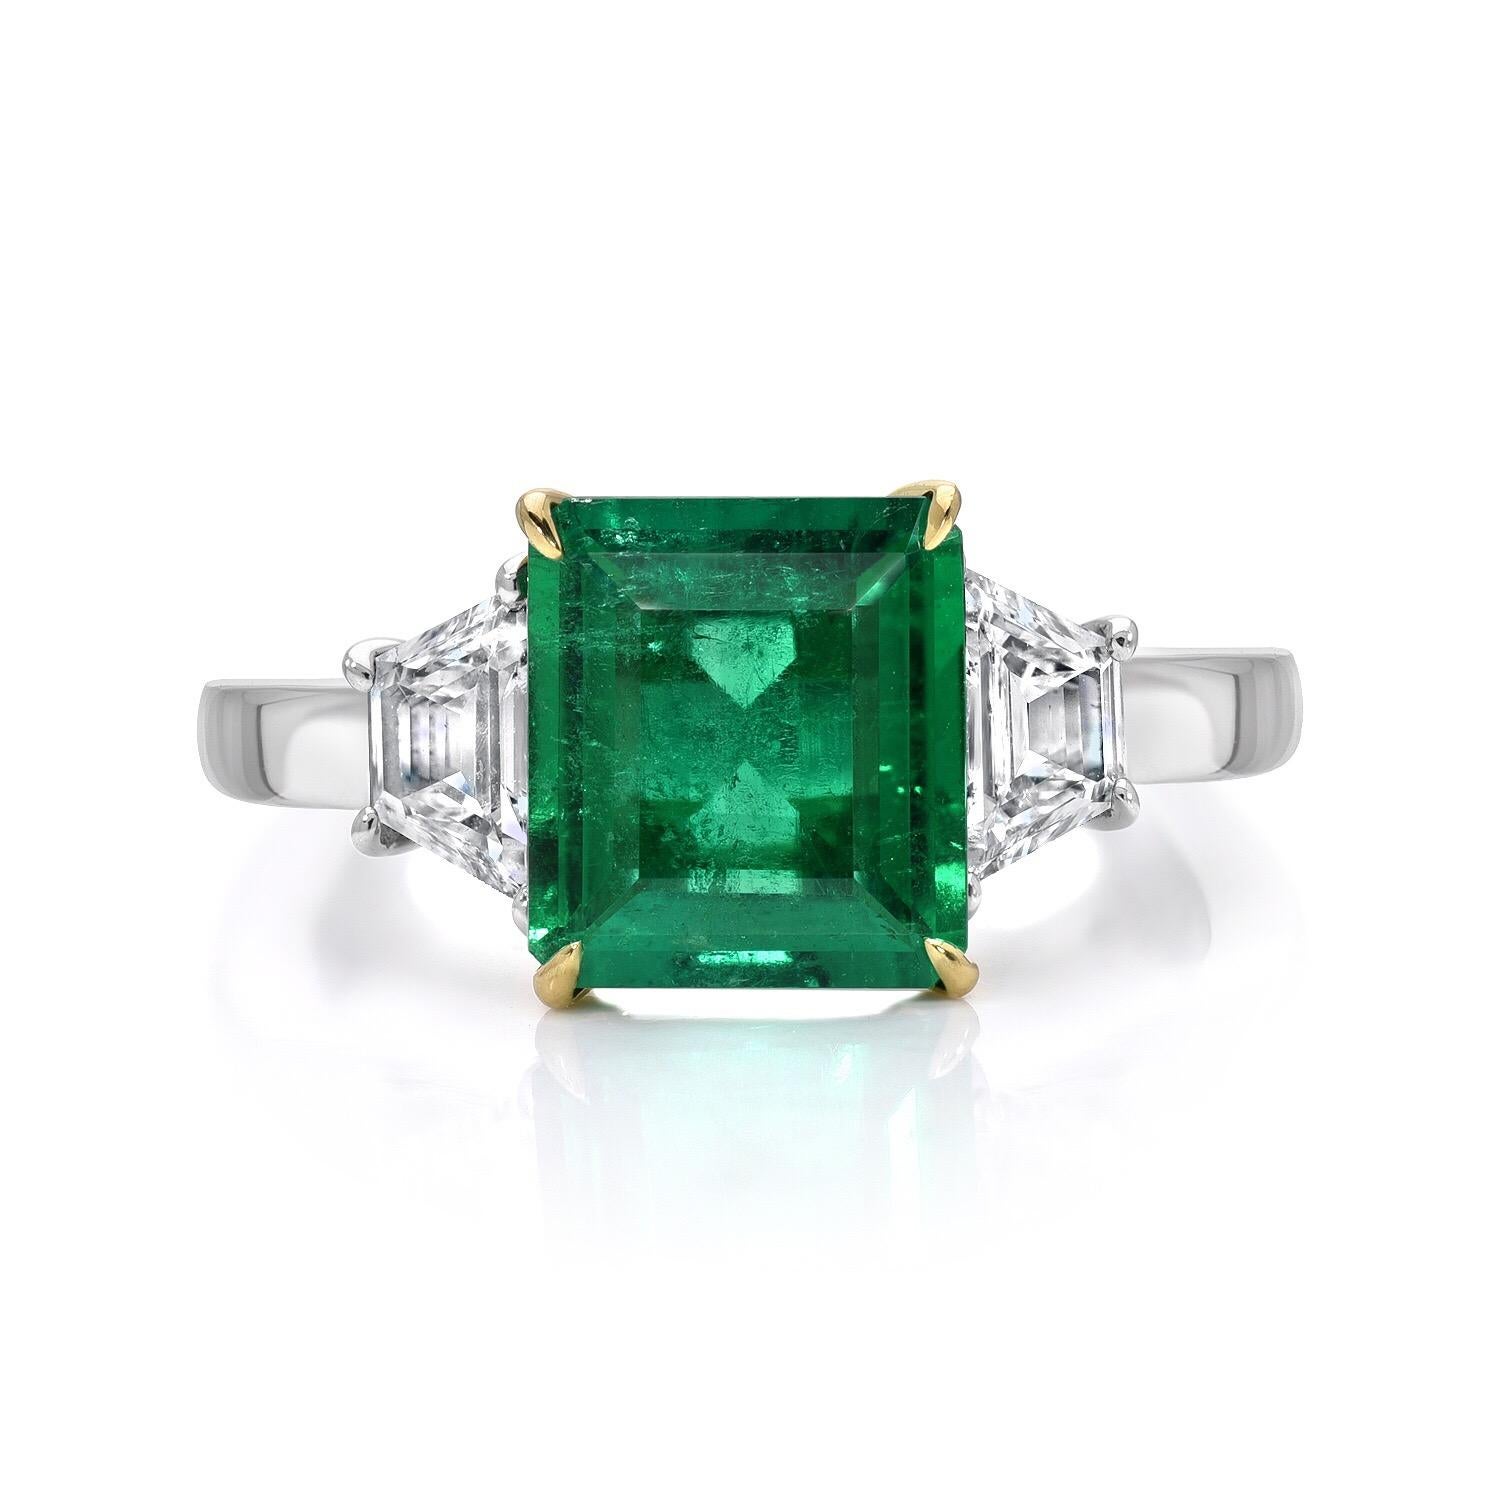 Colombian Emerald engagement ring featuring an emerald cut weighing a total of 1.85 carat flanked by a pair of Trapezoid diamonds weighing a total of 0.60 carats in Platinum.
The AGL certificate is attached to the images for your convenience. 
Ring